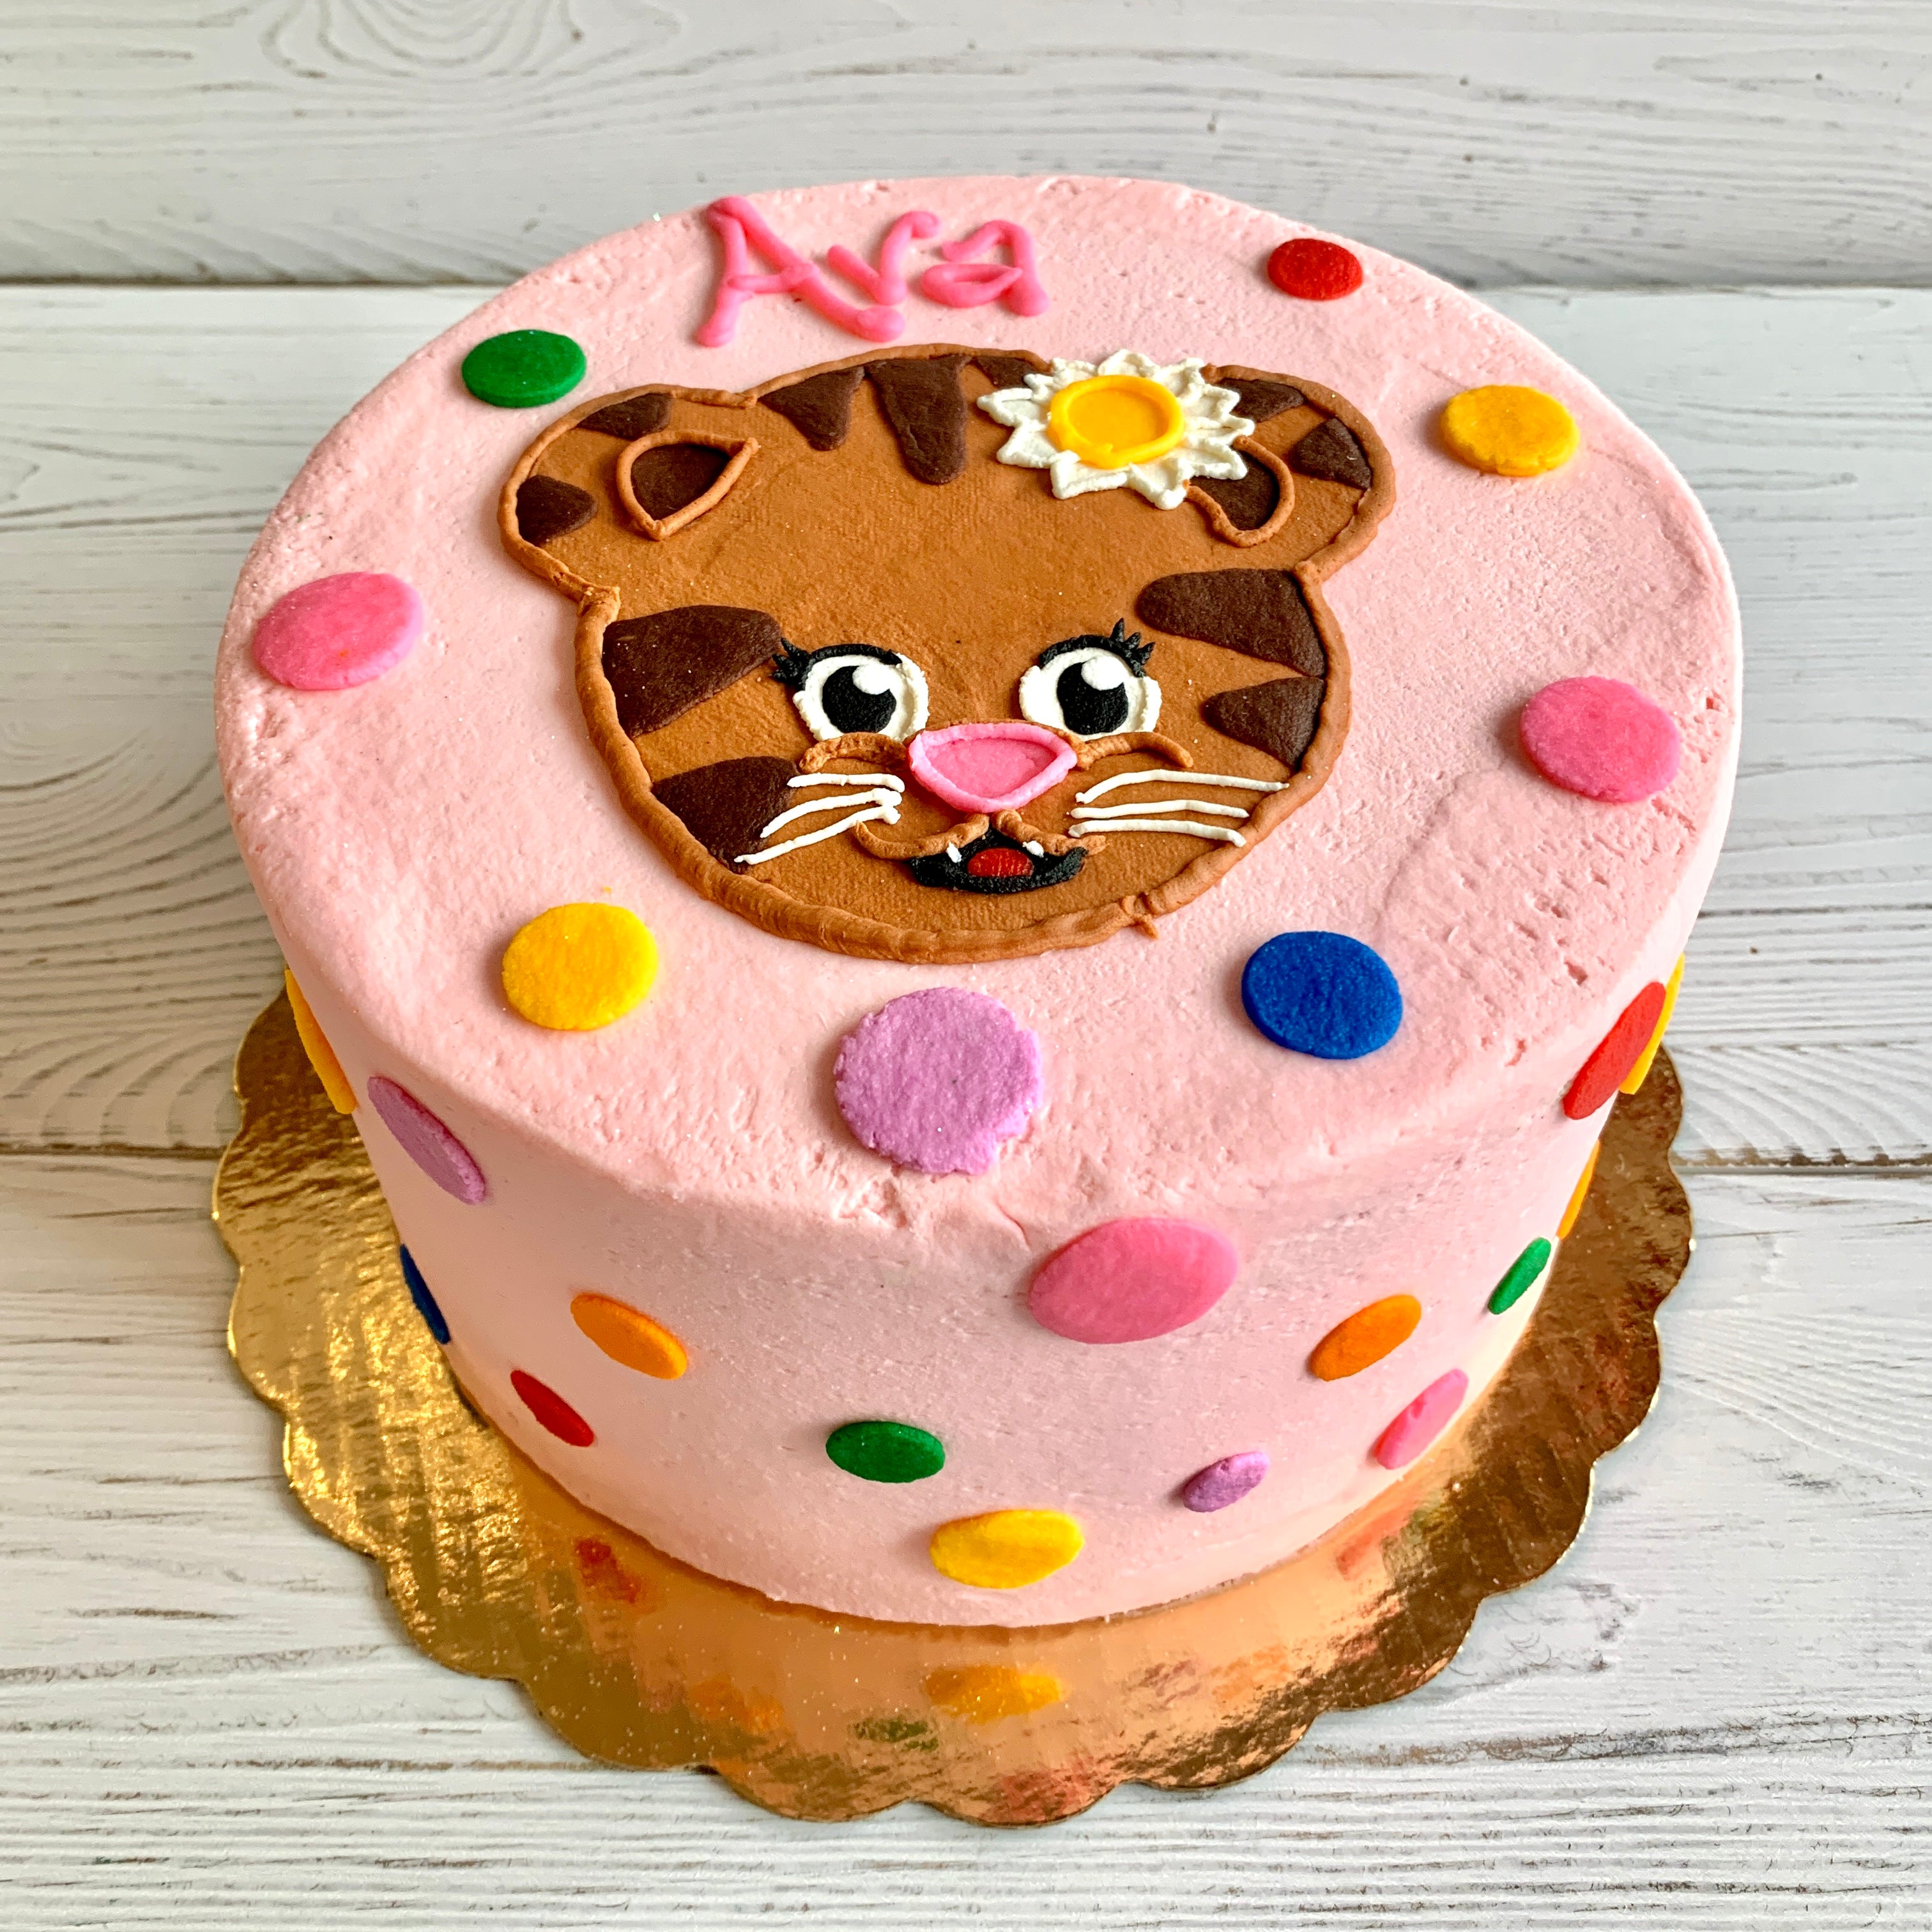 Update more than 151 cake tiger face best - awesomeenglish.edu.vn